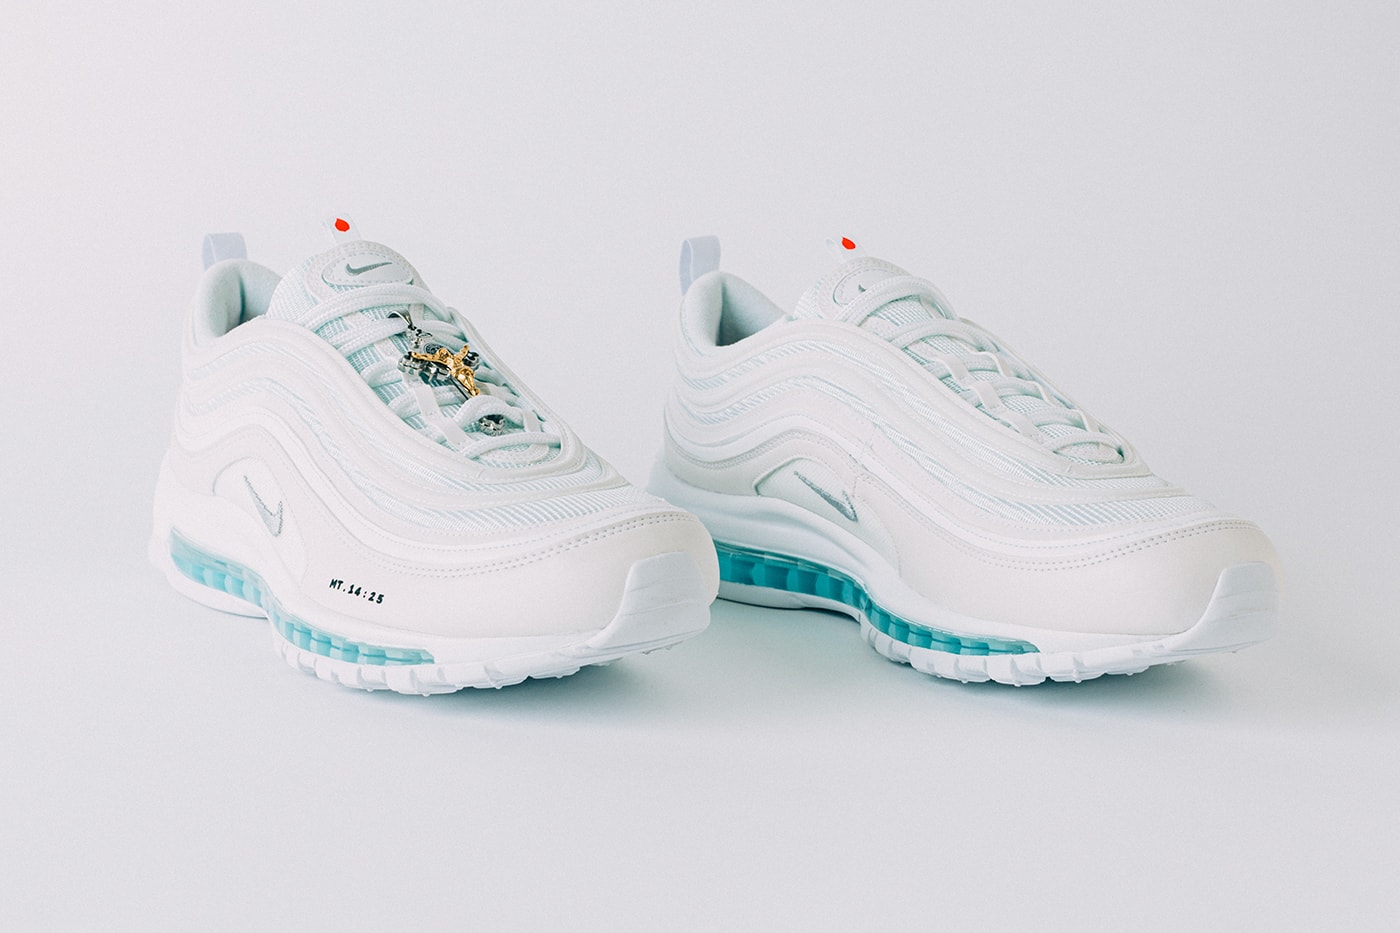 air max 97 walk on water - Buy air max 97 walk on water at Best Price in  Philippines